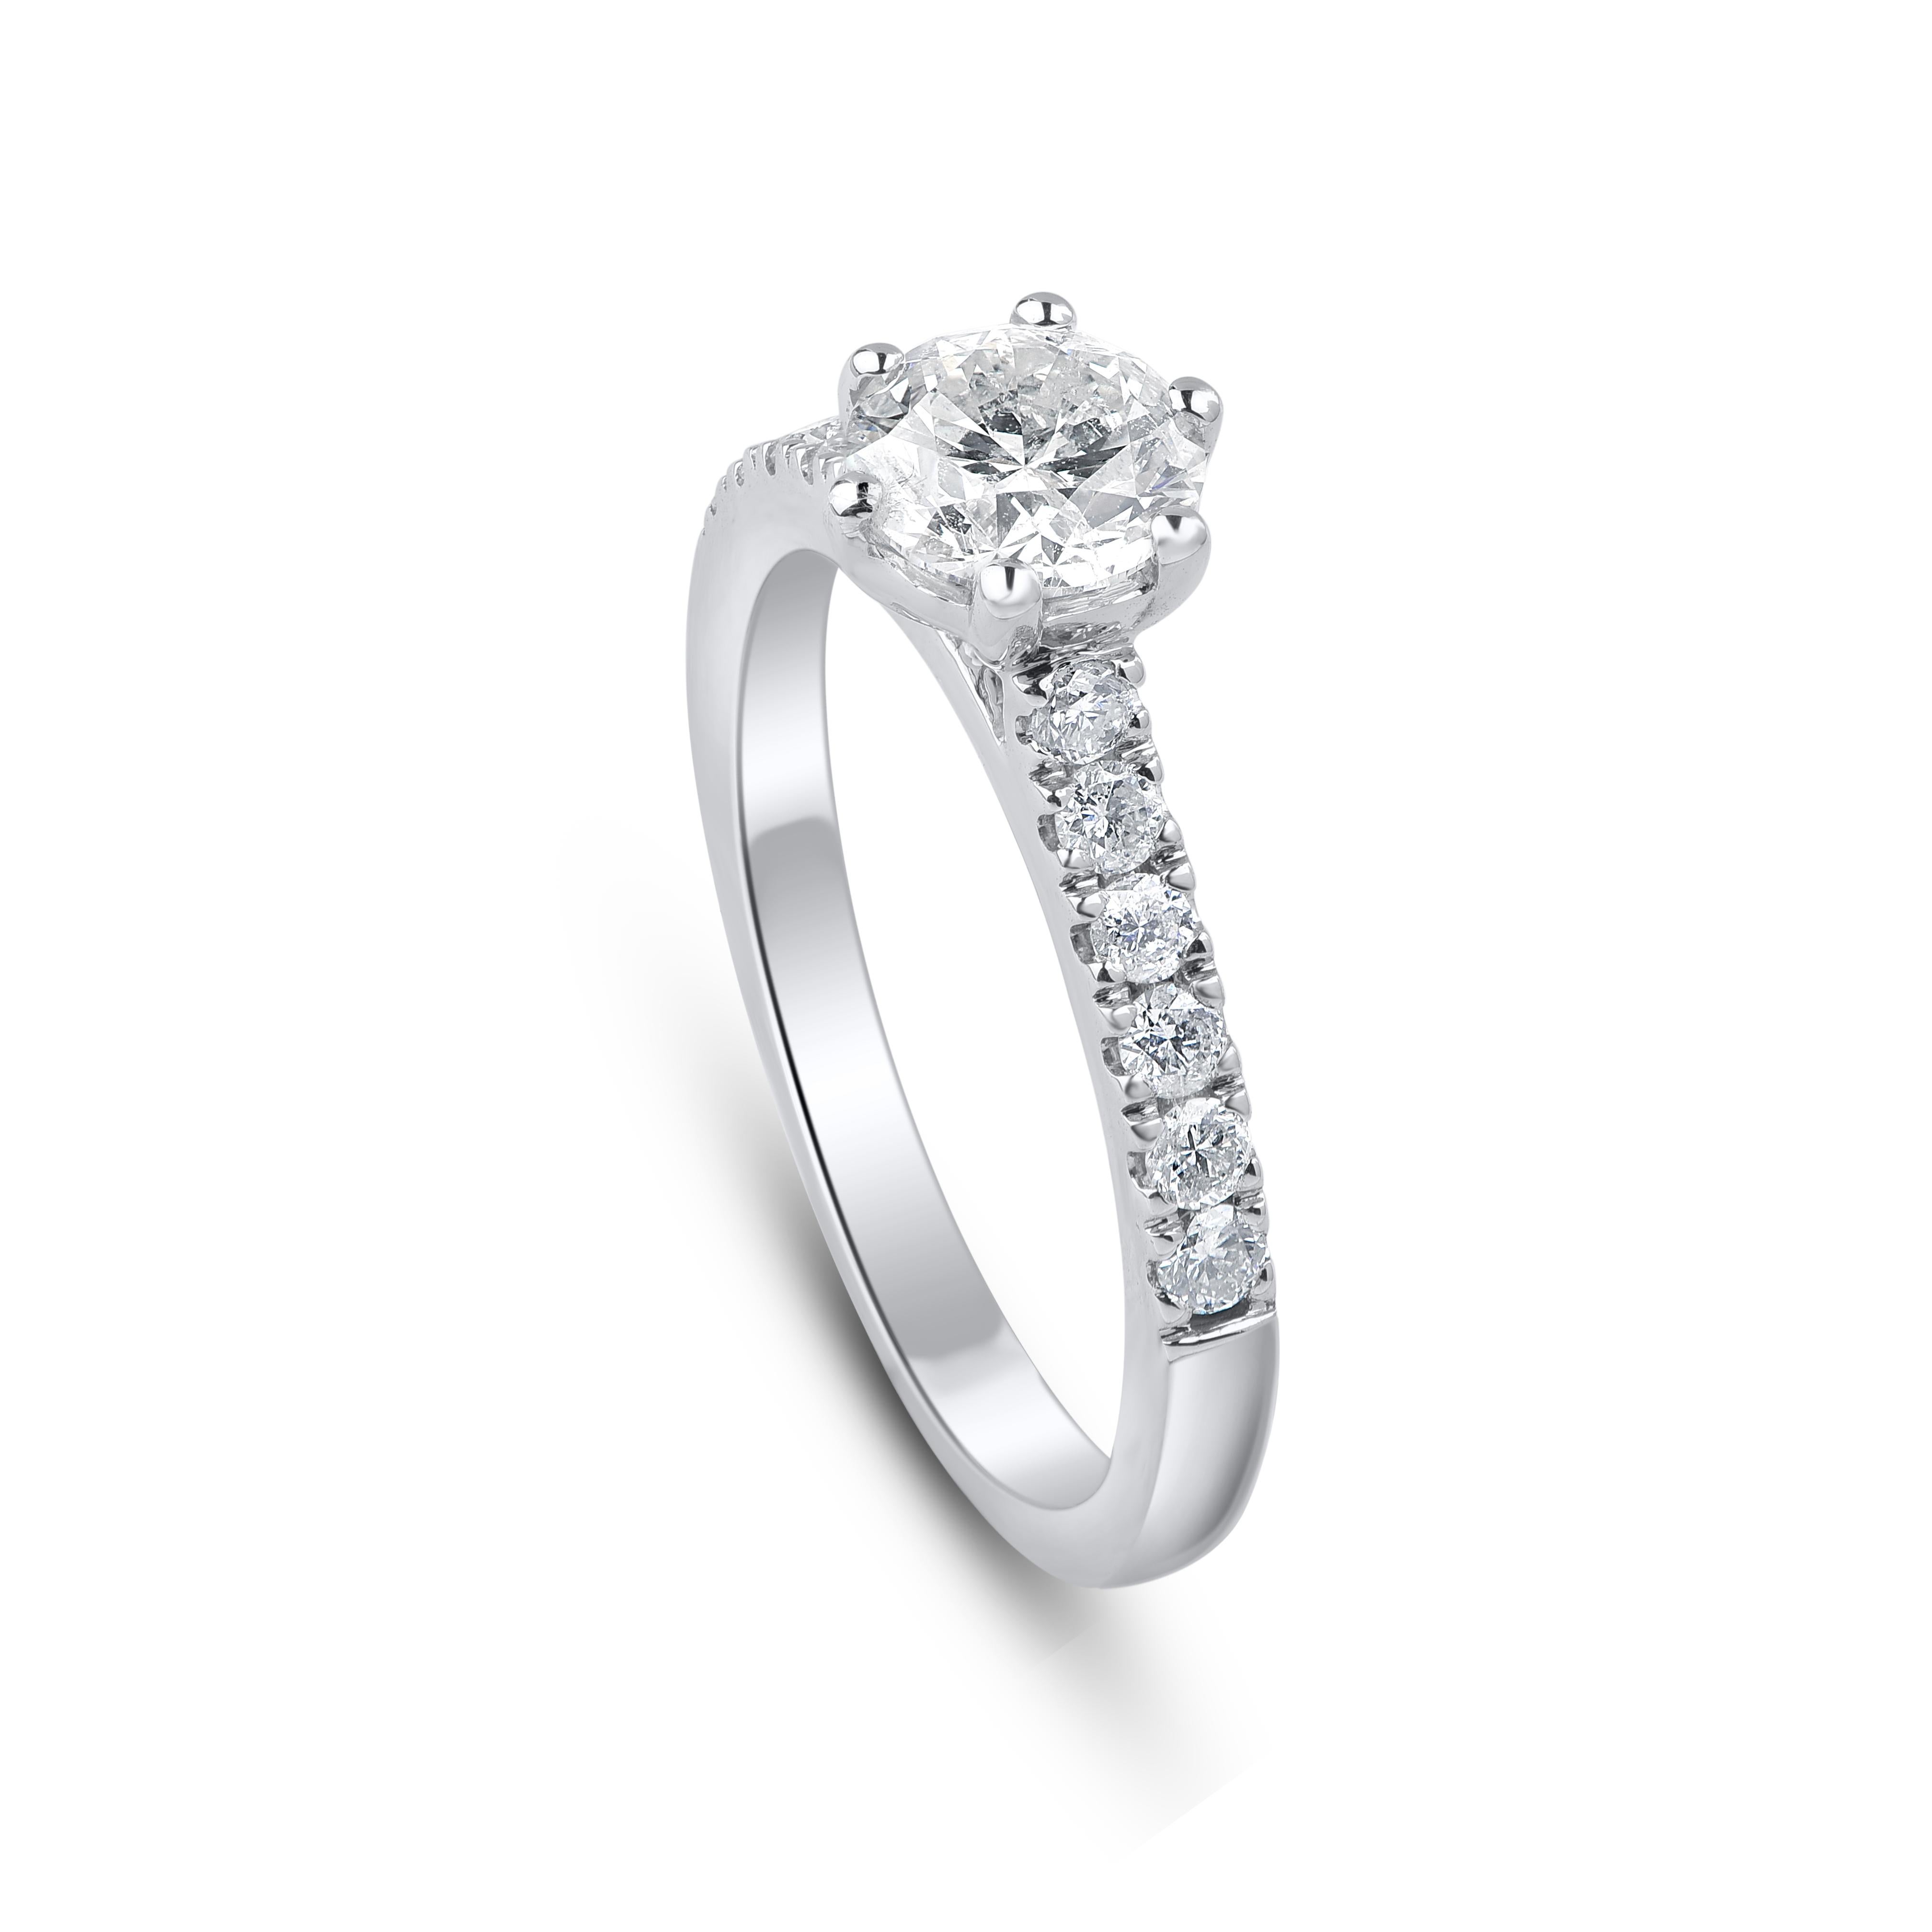 Fashioned in 18 kt white gold and this ring is studded with 13 round-cut diamonds in prong and micro-prong setting. Diamonds are graded J-K Color, I3 Clarity. Ring size is US size 7.25 and can be resized on request. 
